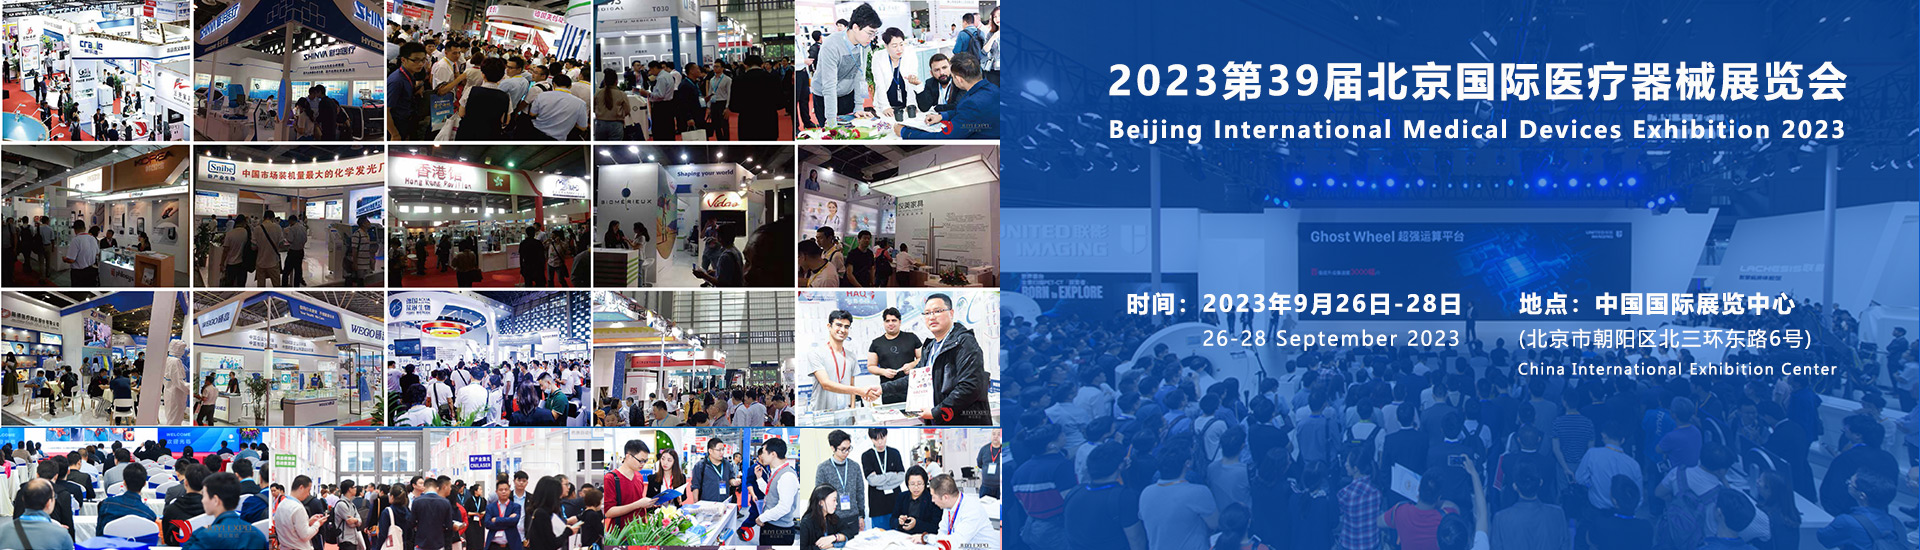 Beijing international medical device Exhibition - what should be prepared before participating in the exhibition